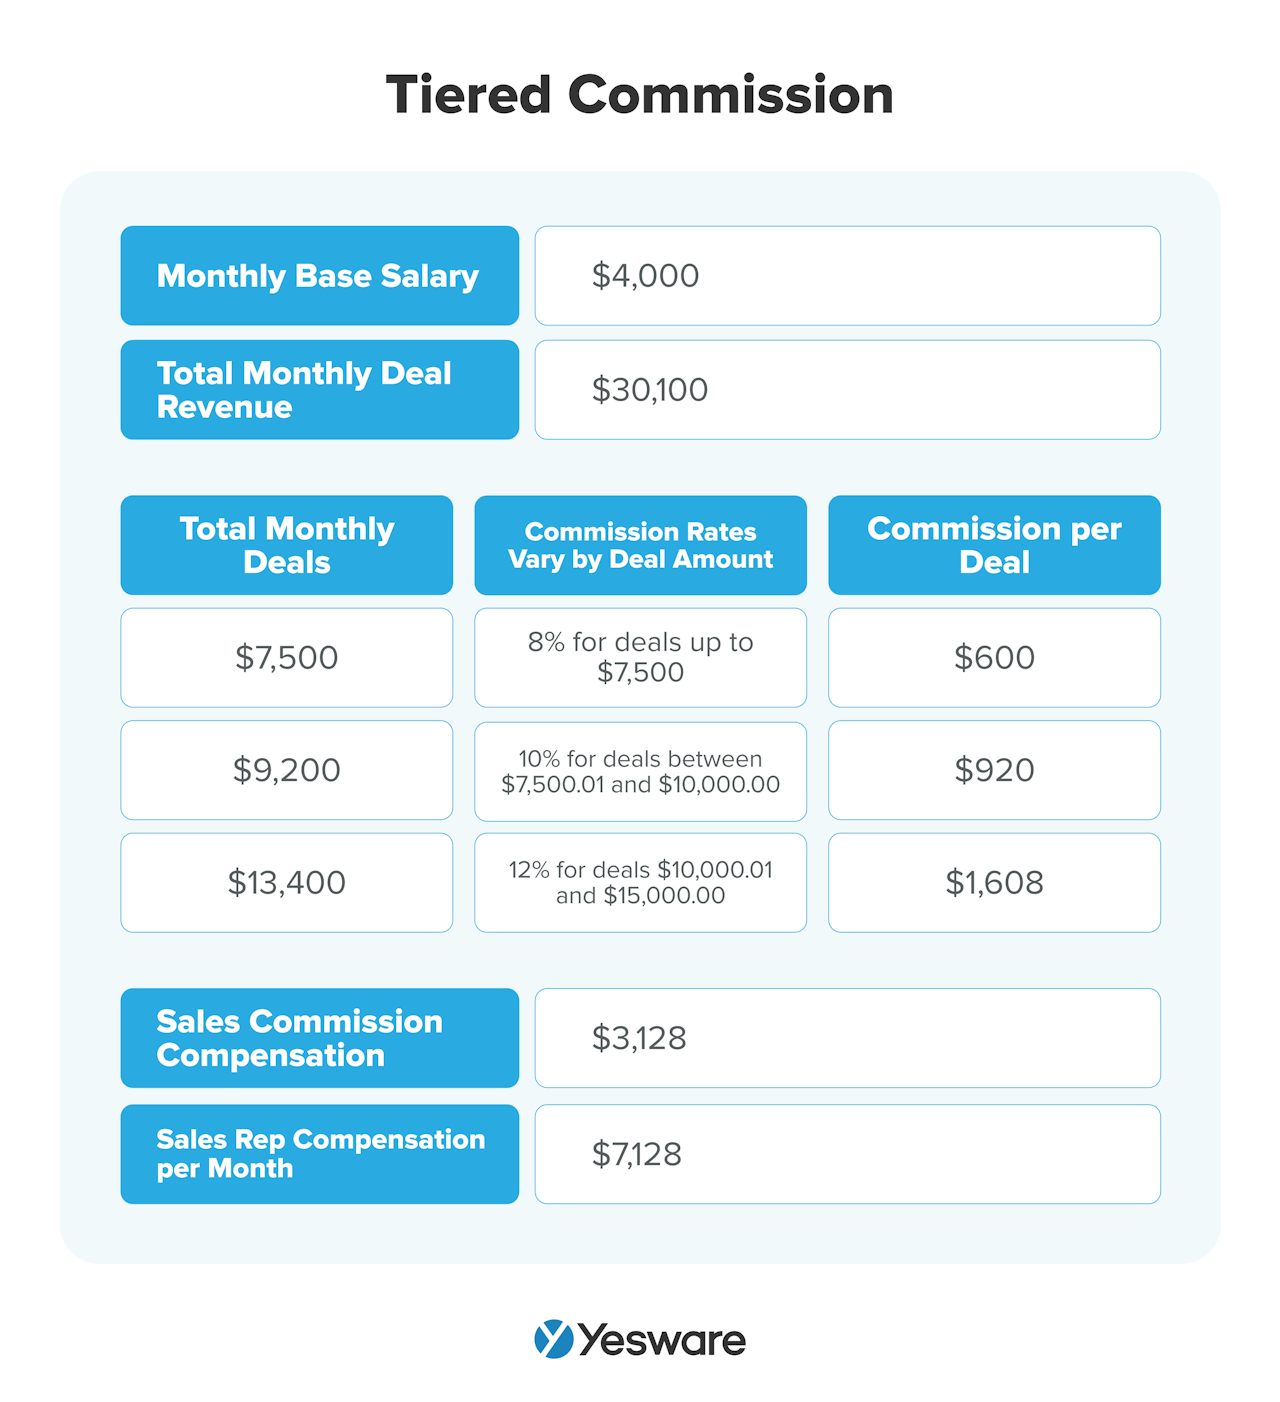 Sales Commission Structure: Tiered Commission